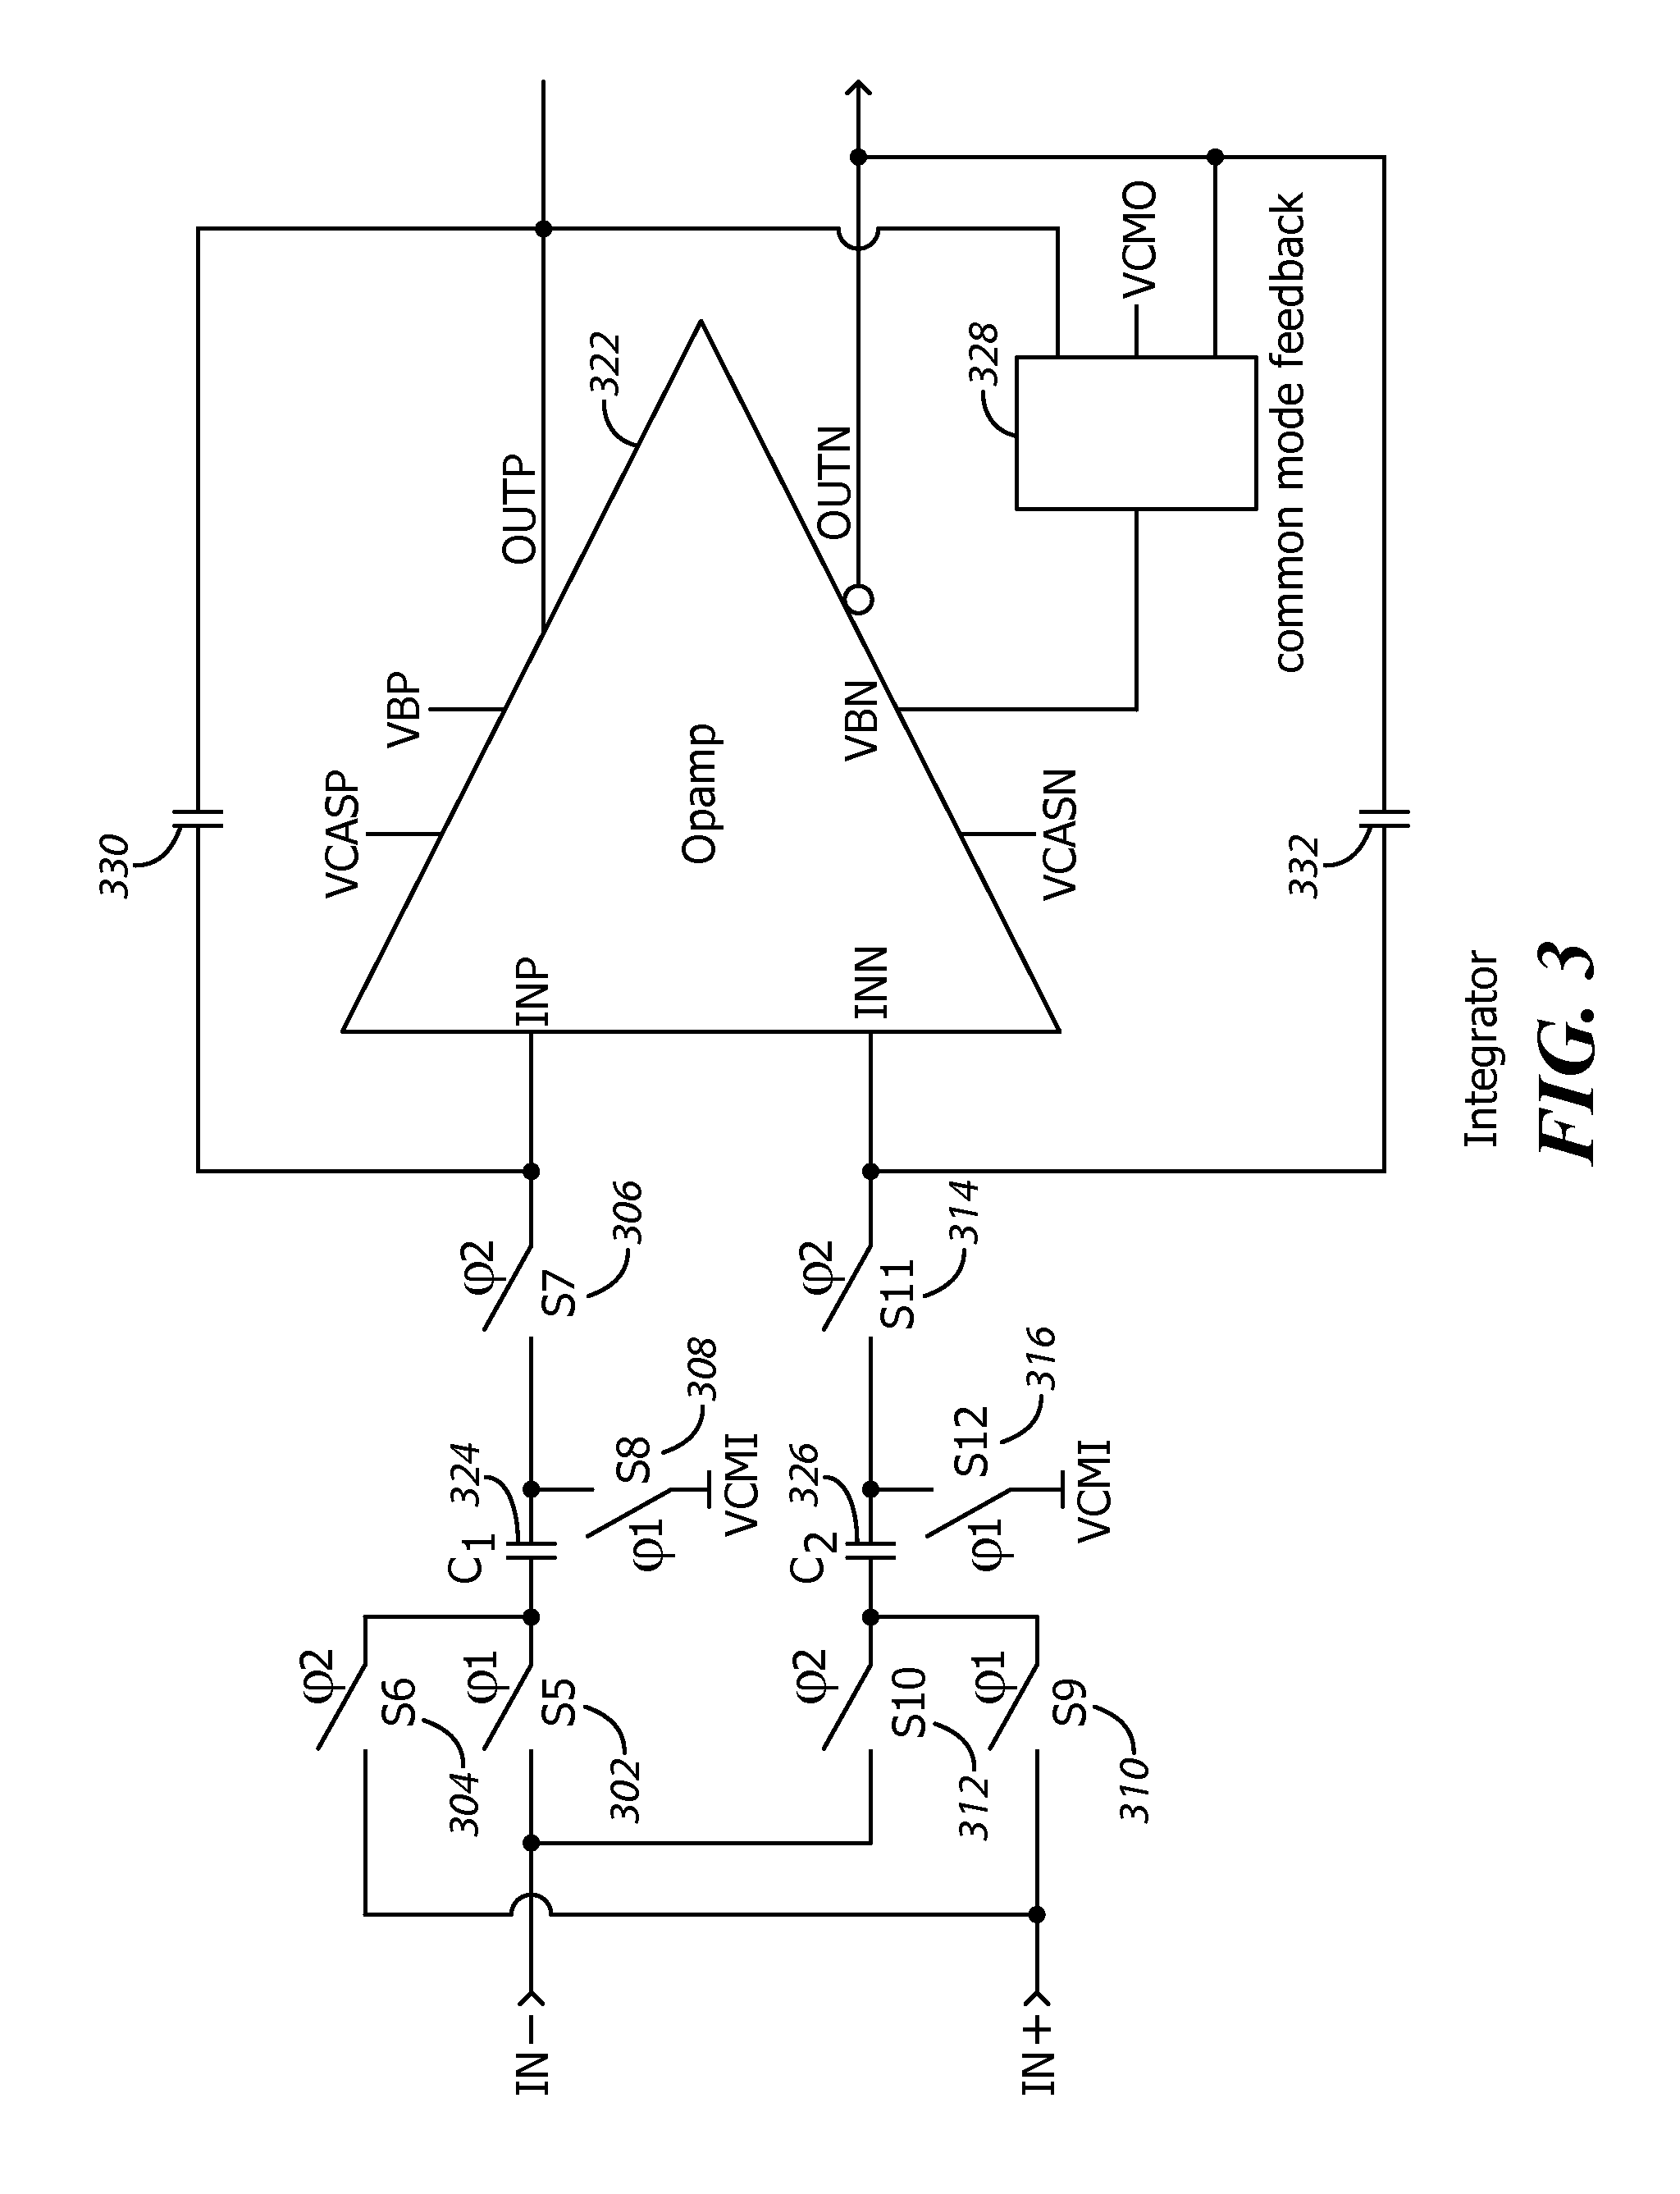 Telescopic OP-AMP With Slew Rate Control